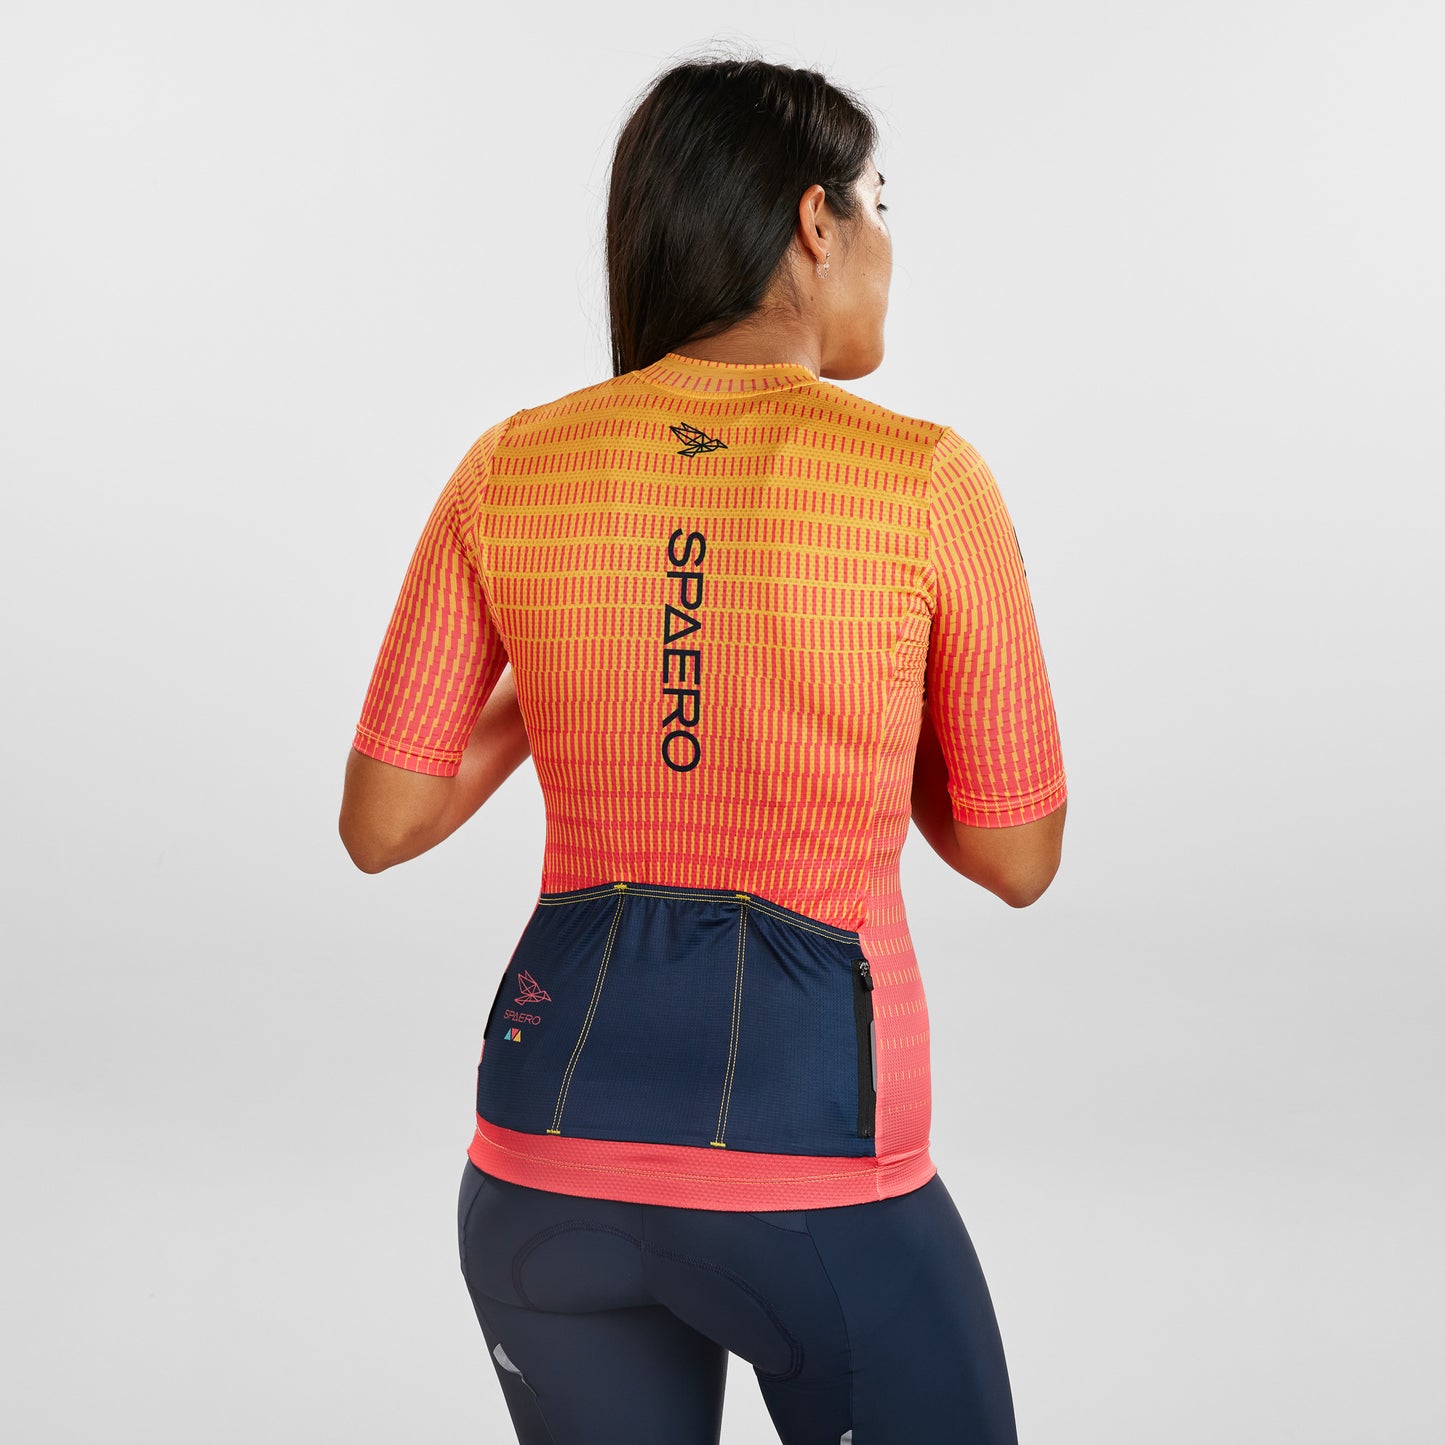 Women's Atom  SP2 2.0 SS Cycle Jersey